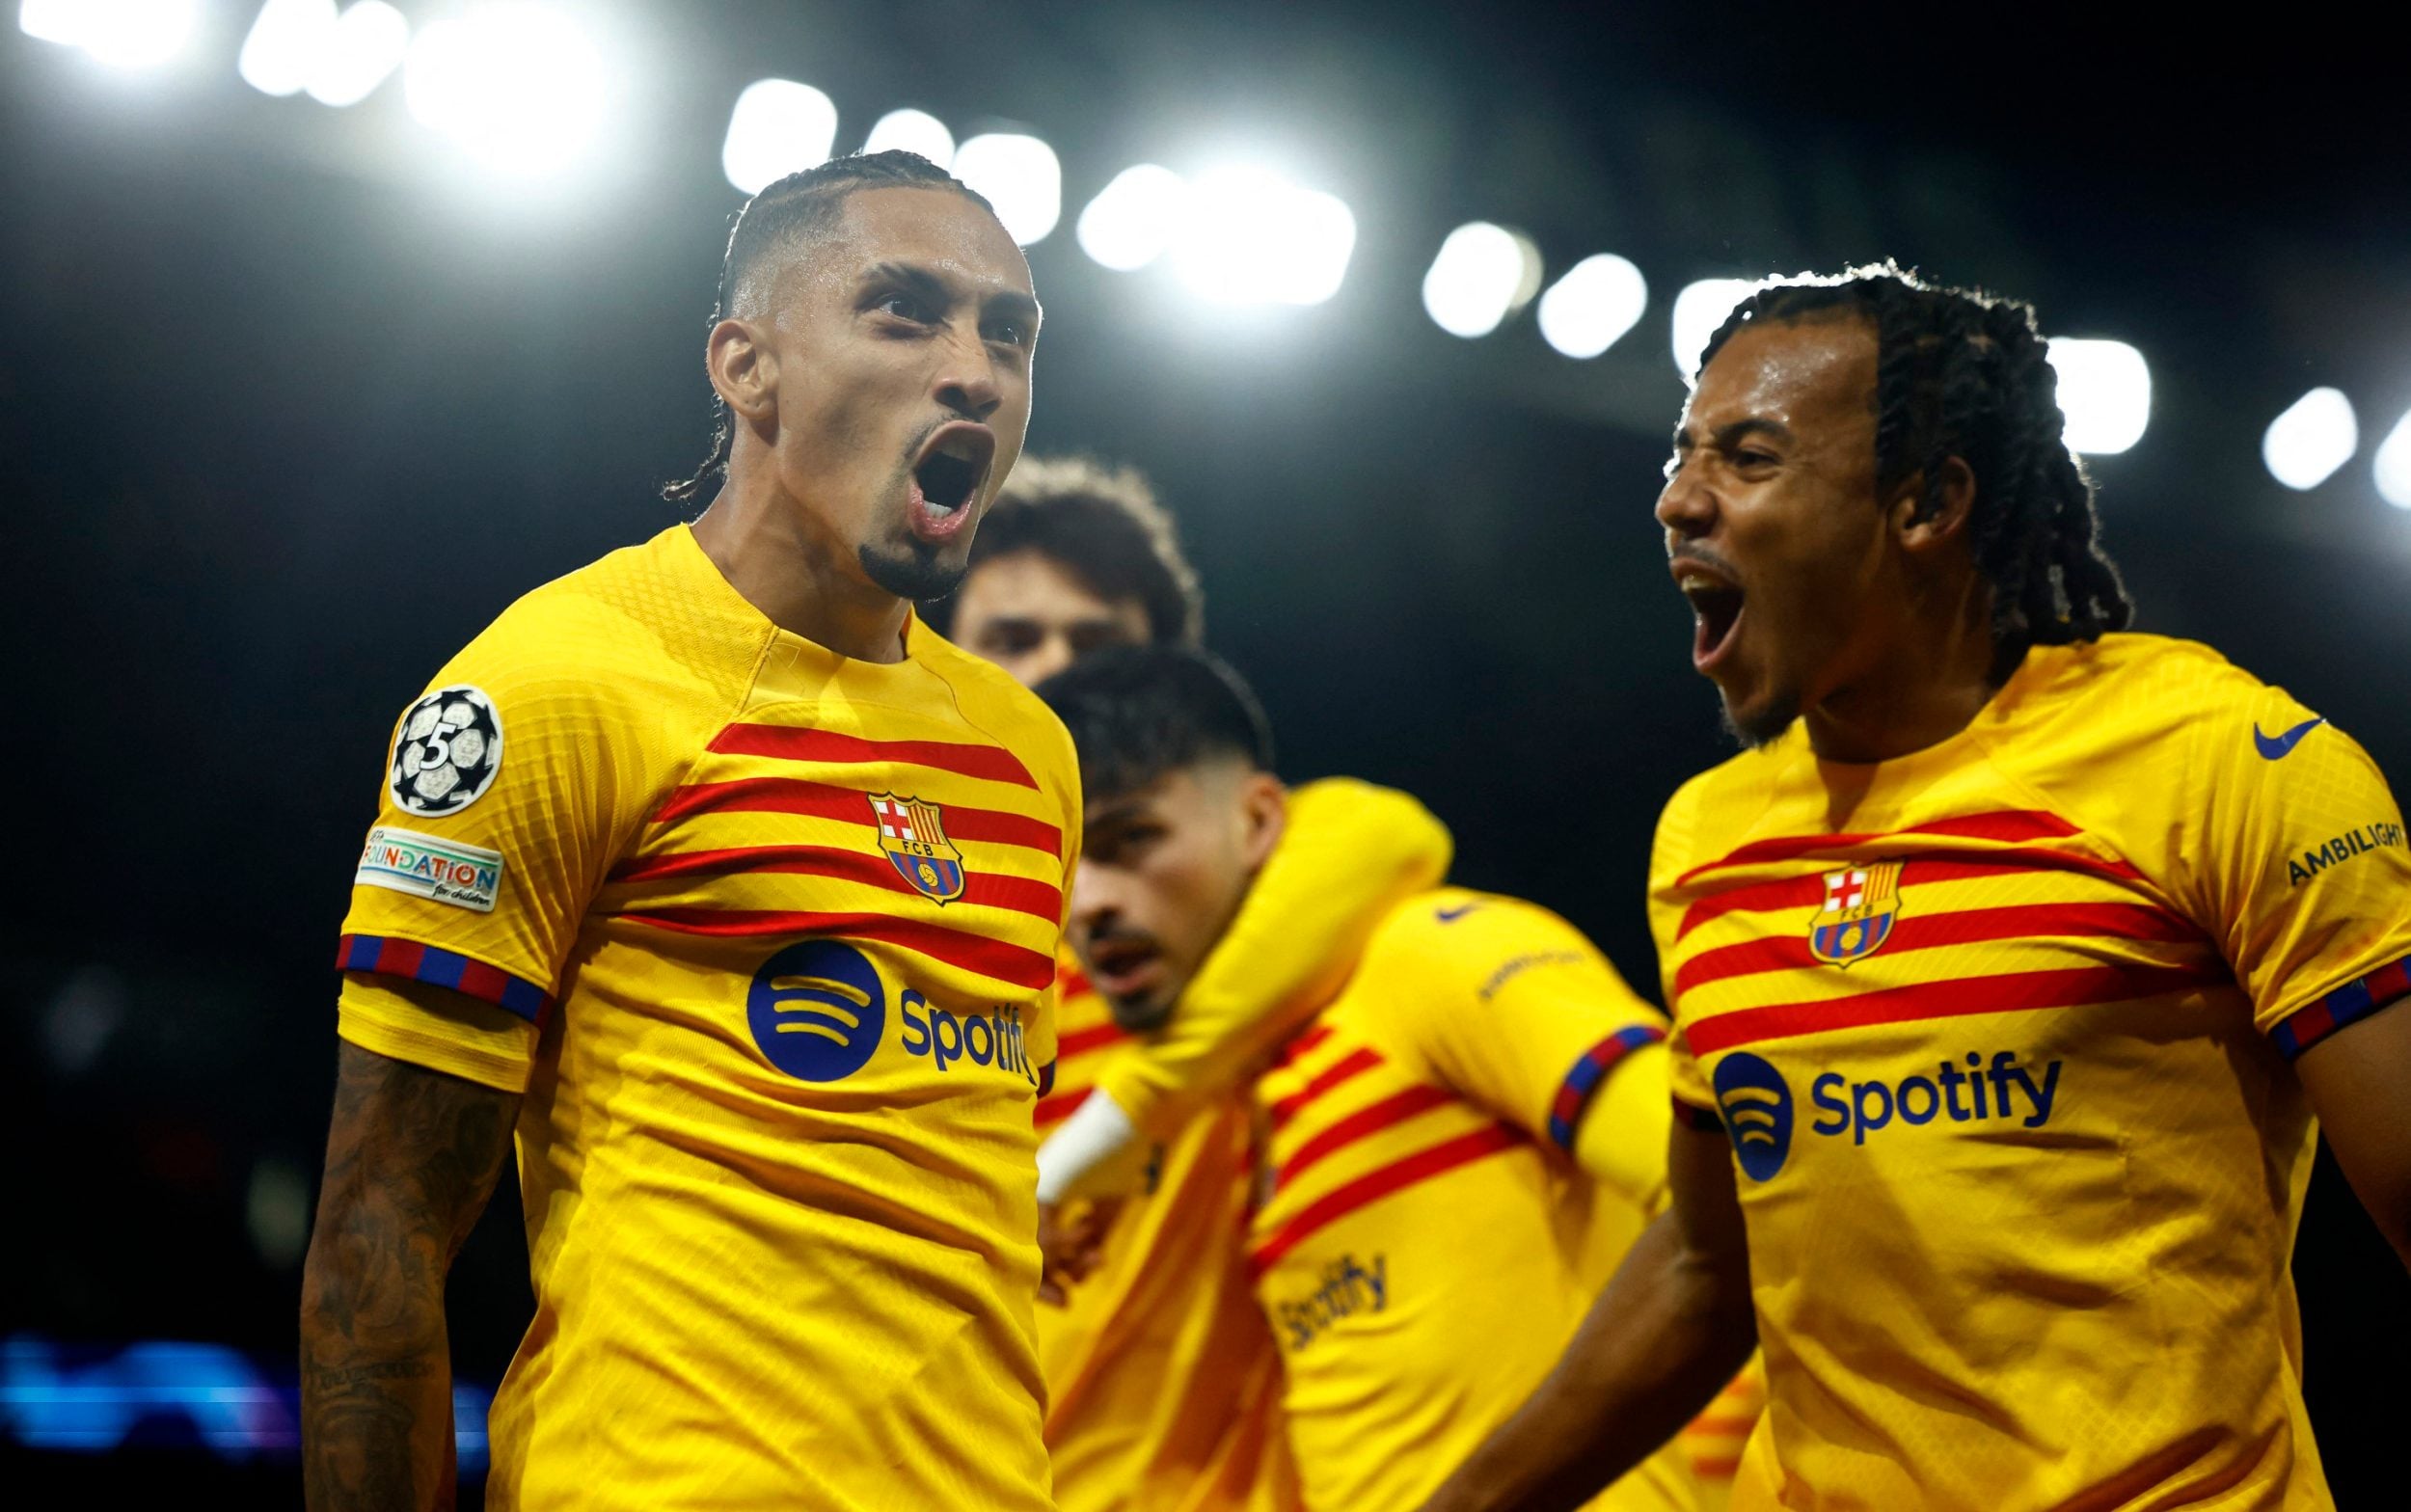 raphinha outshines kylian mbappe as barcelona earn advantage over psg in five-goal thriller